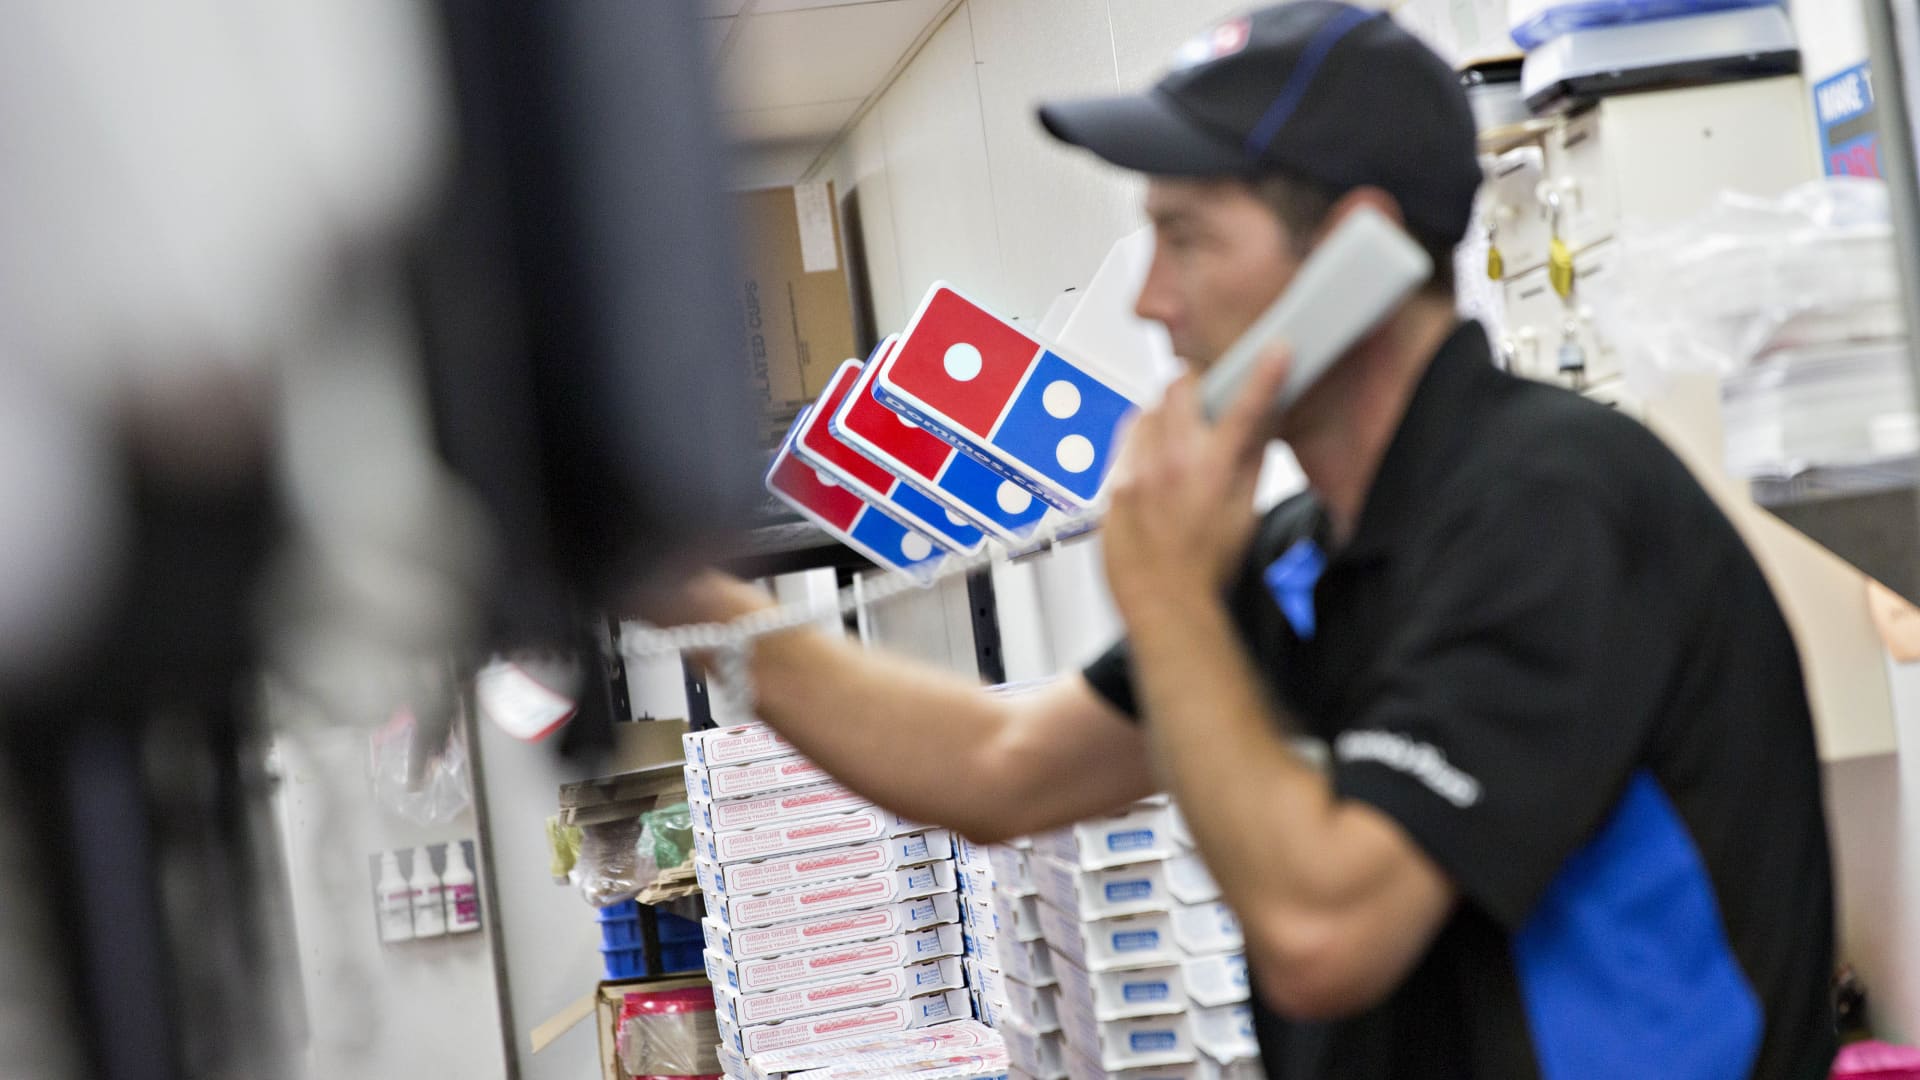 Domino's expects to hire 10,000 workers